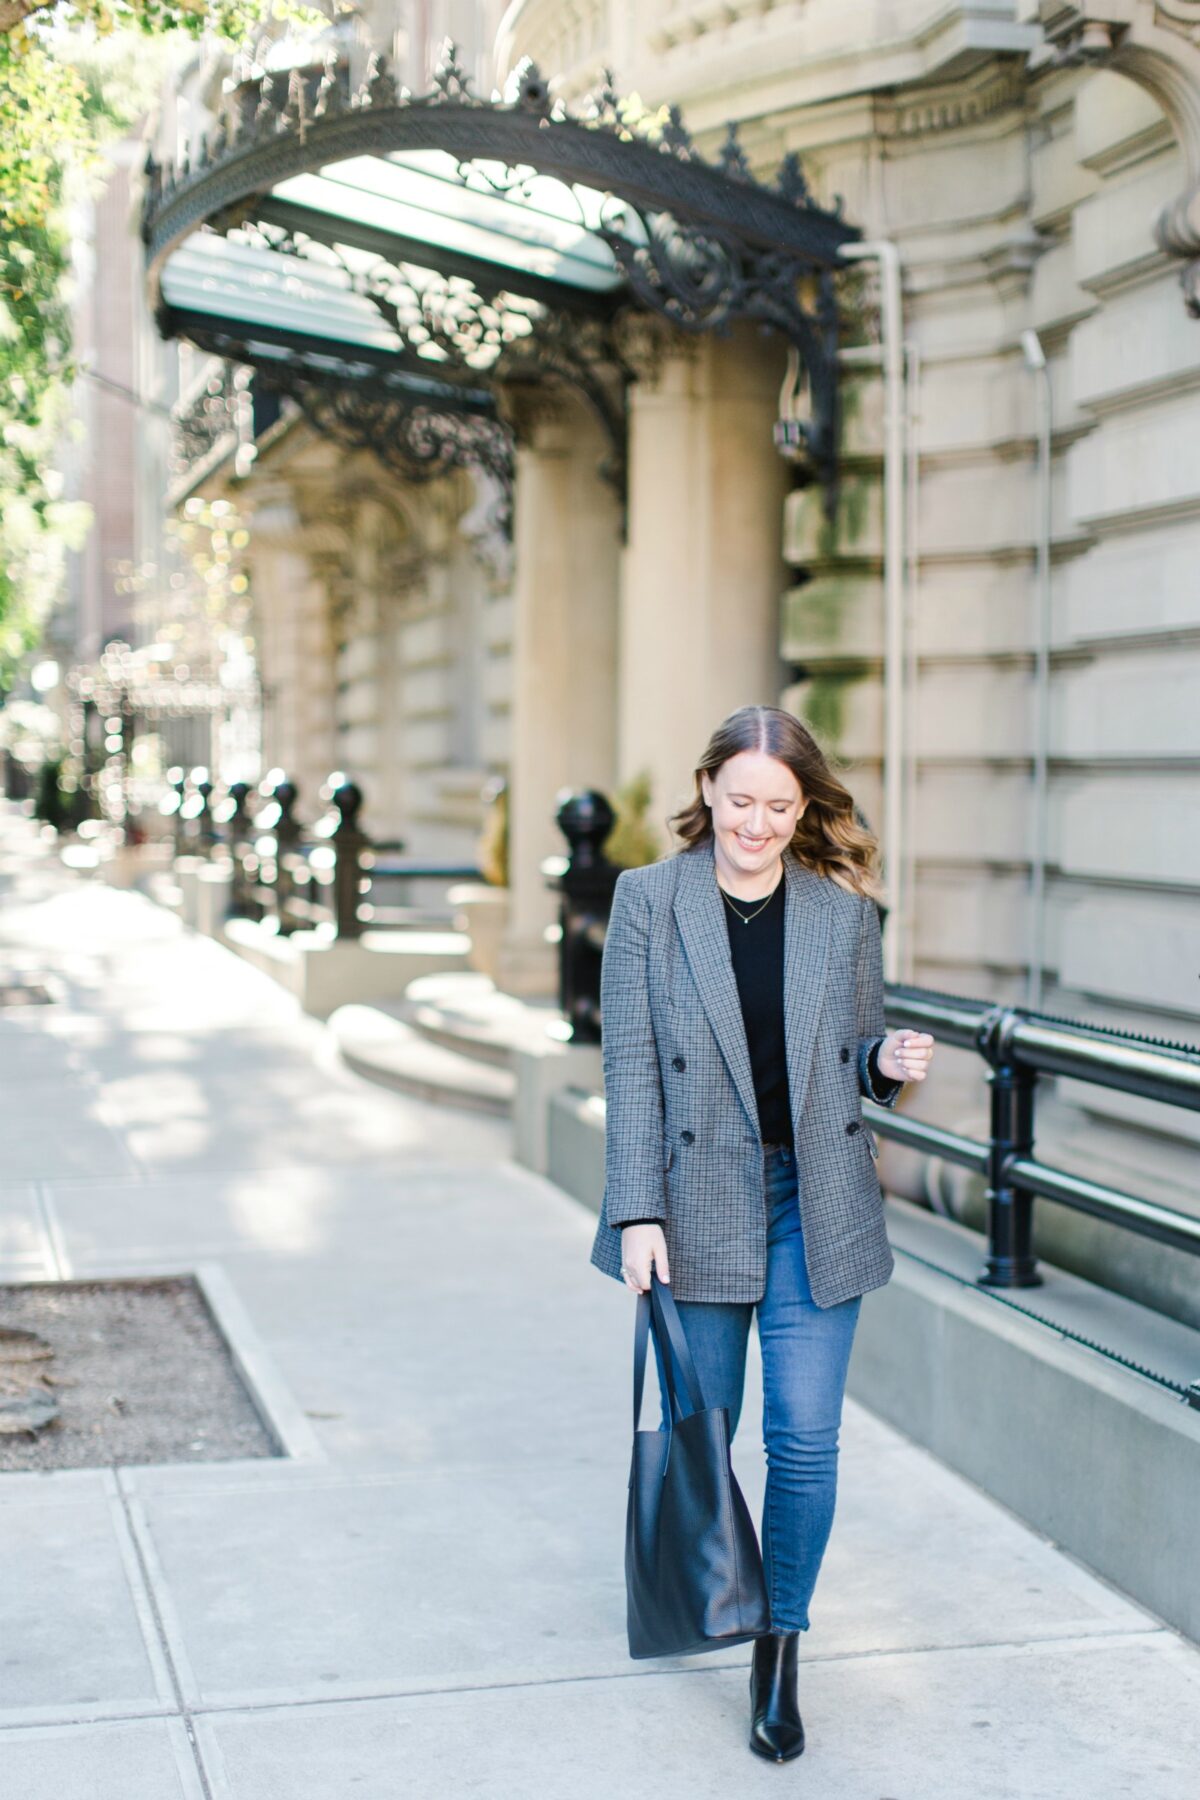 Everlane Boots and Blazers I My Top Purchases of 2019